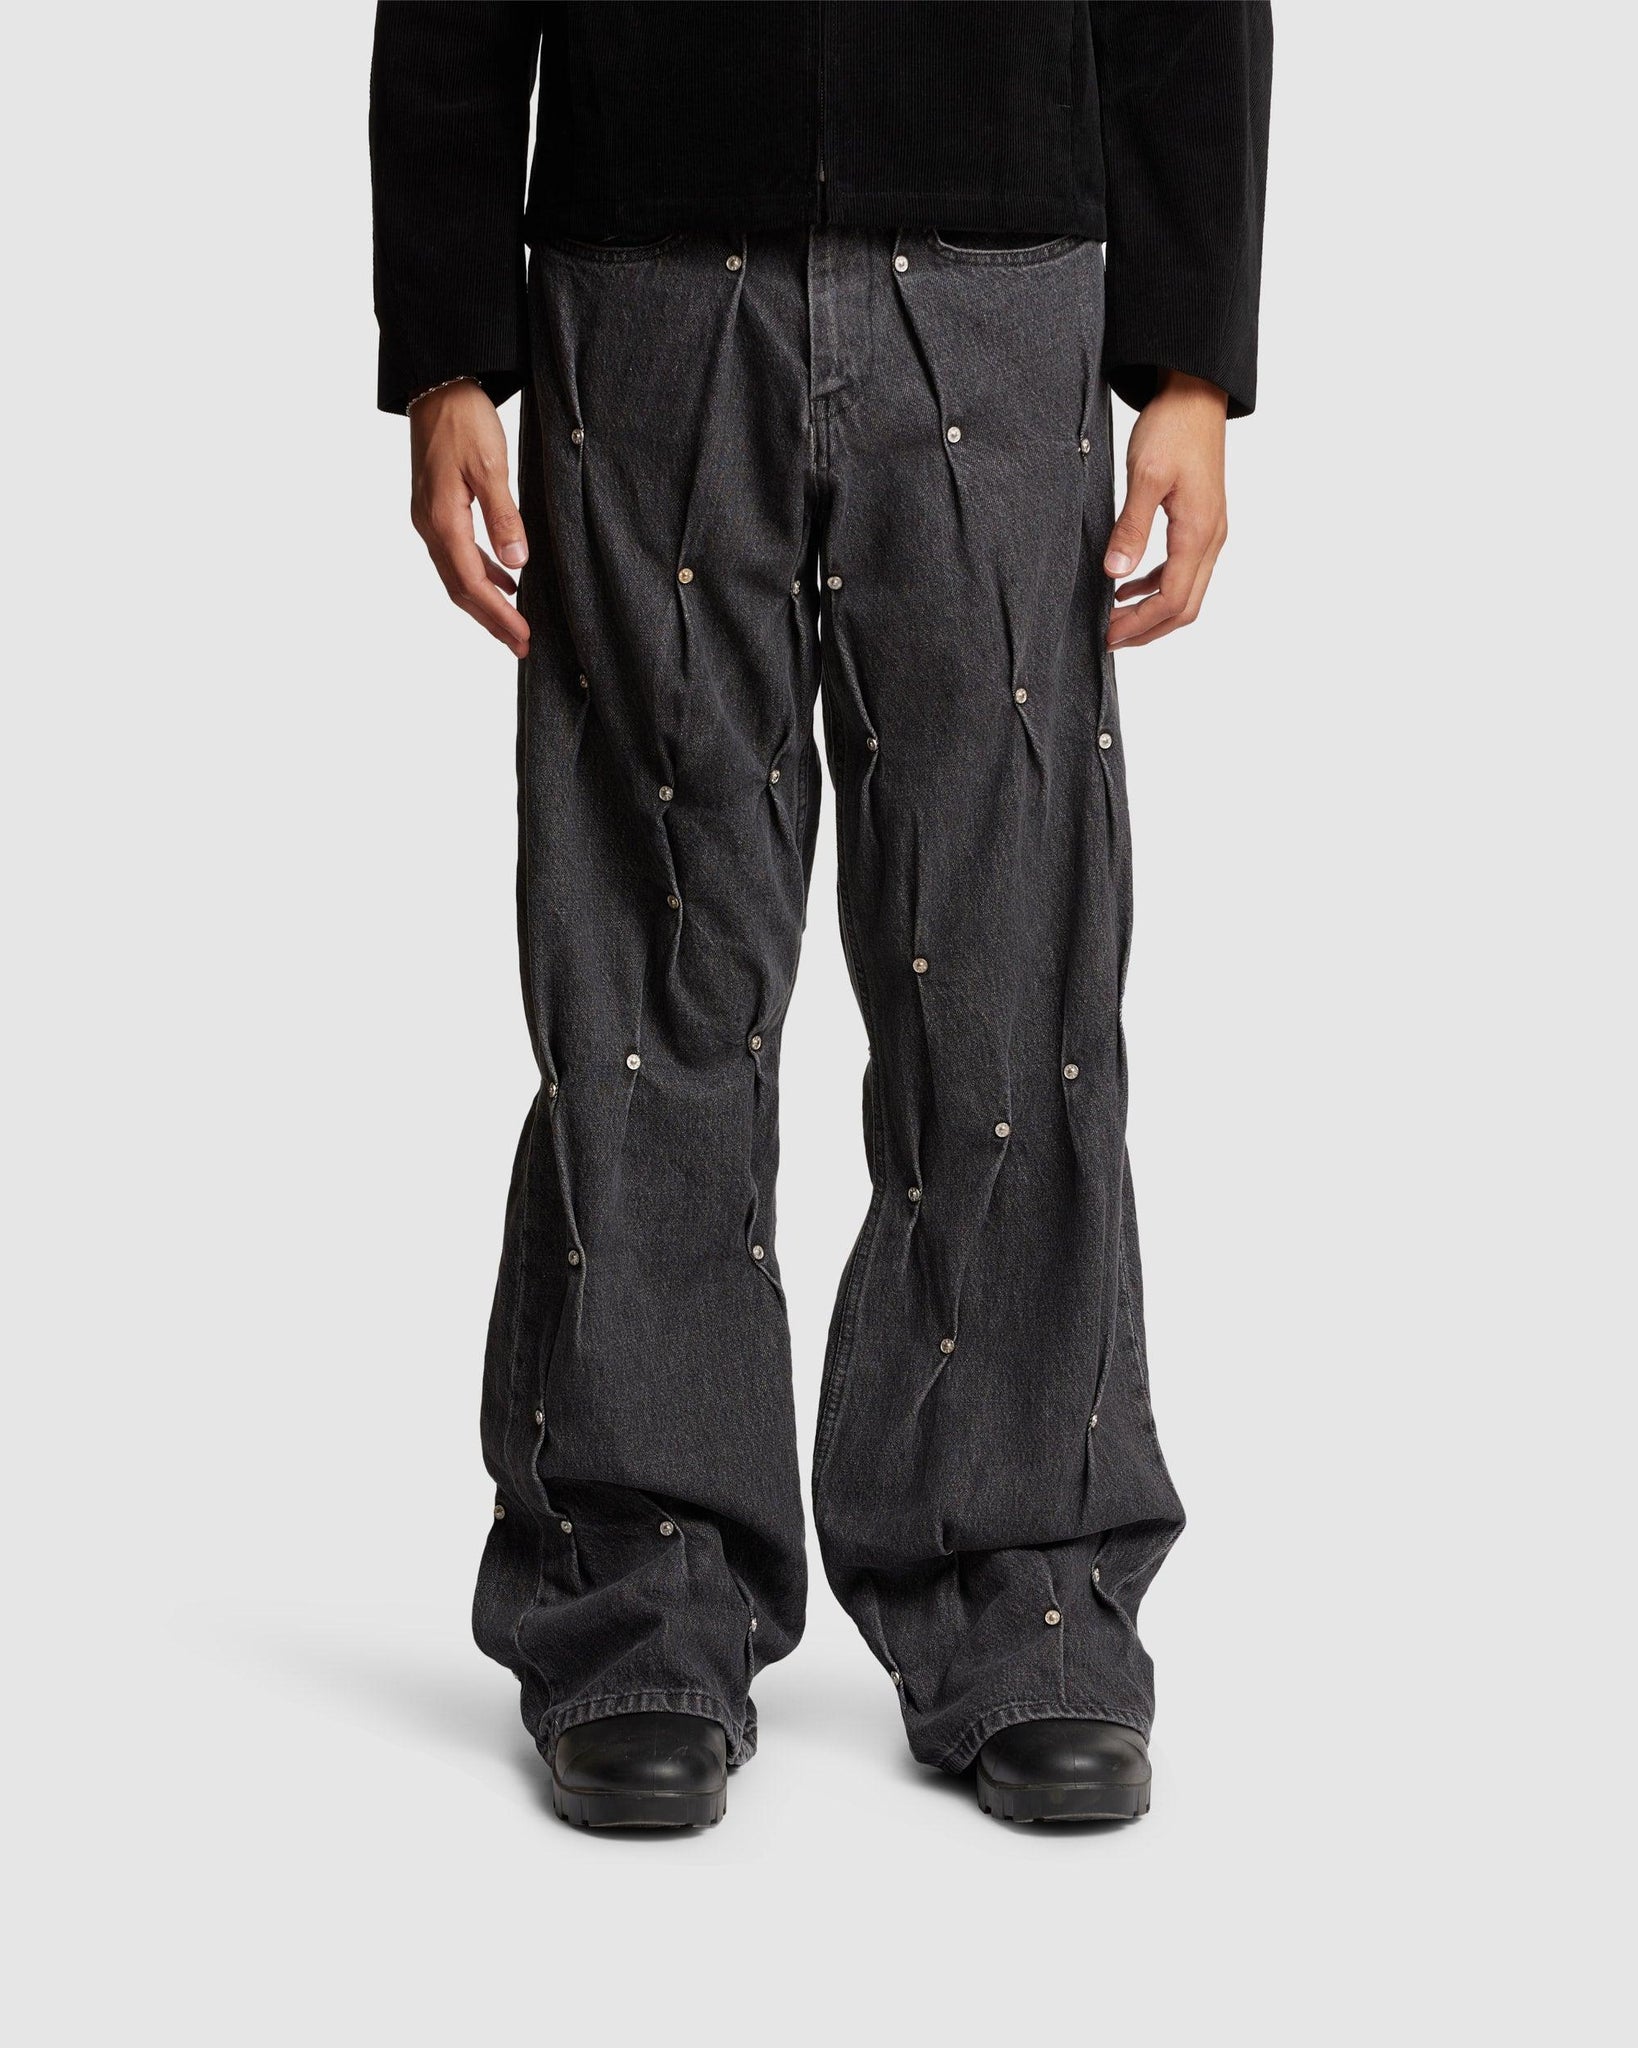 Multi Rivet Denim Pants - {{ collection.title }} - Chinatown Country Club 